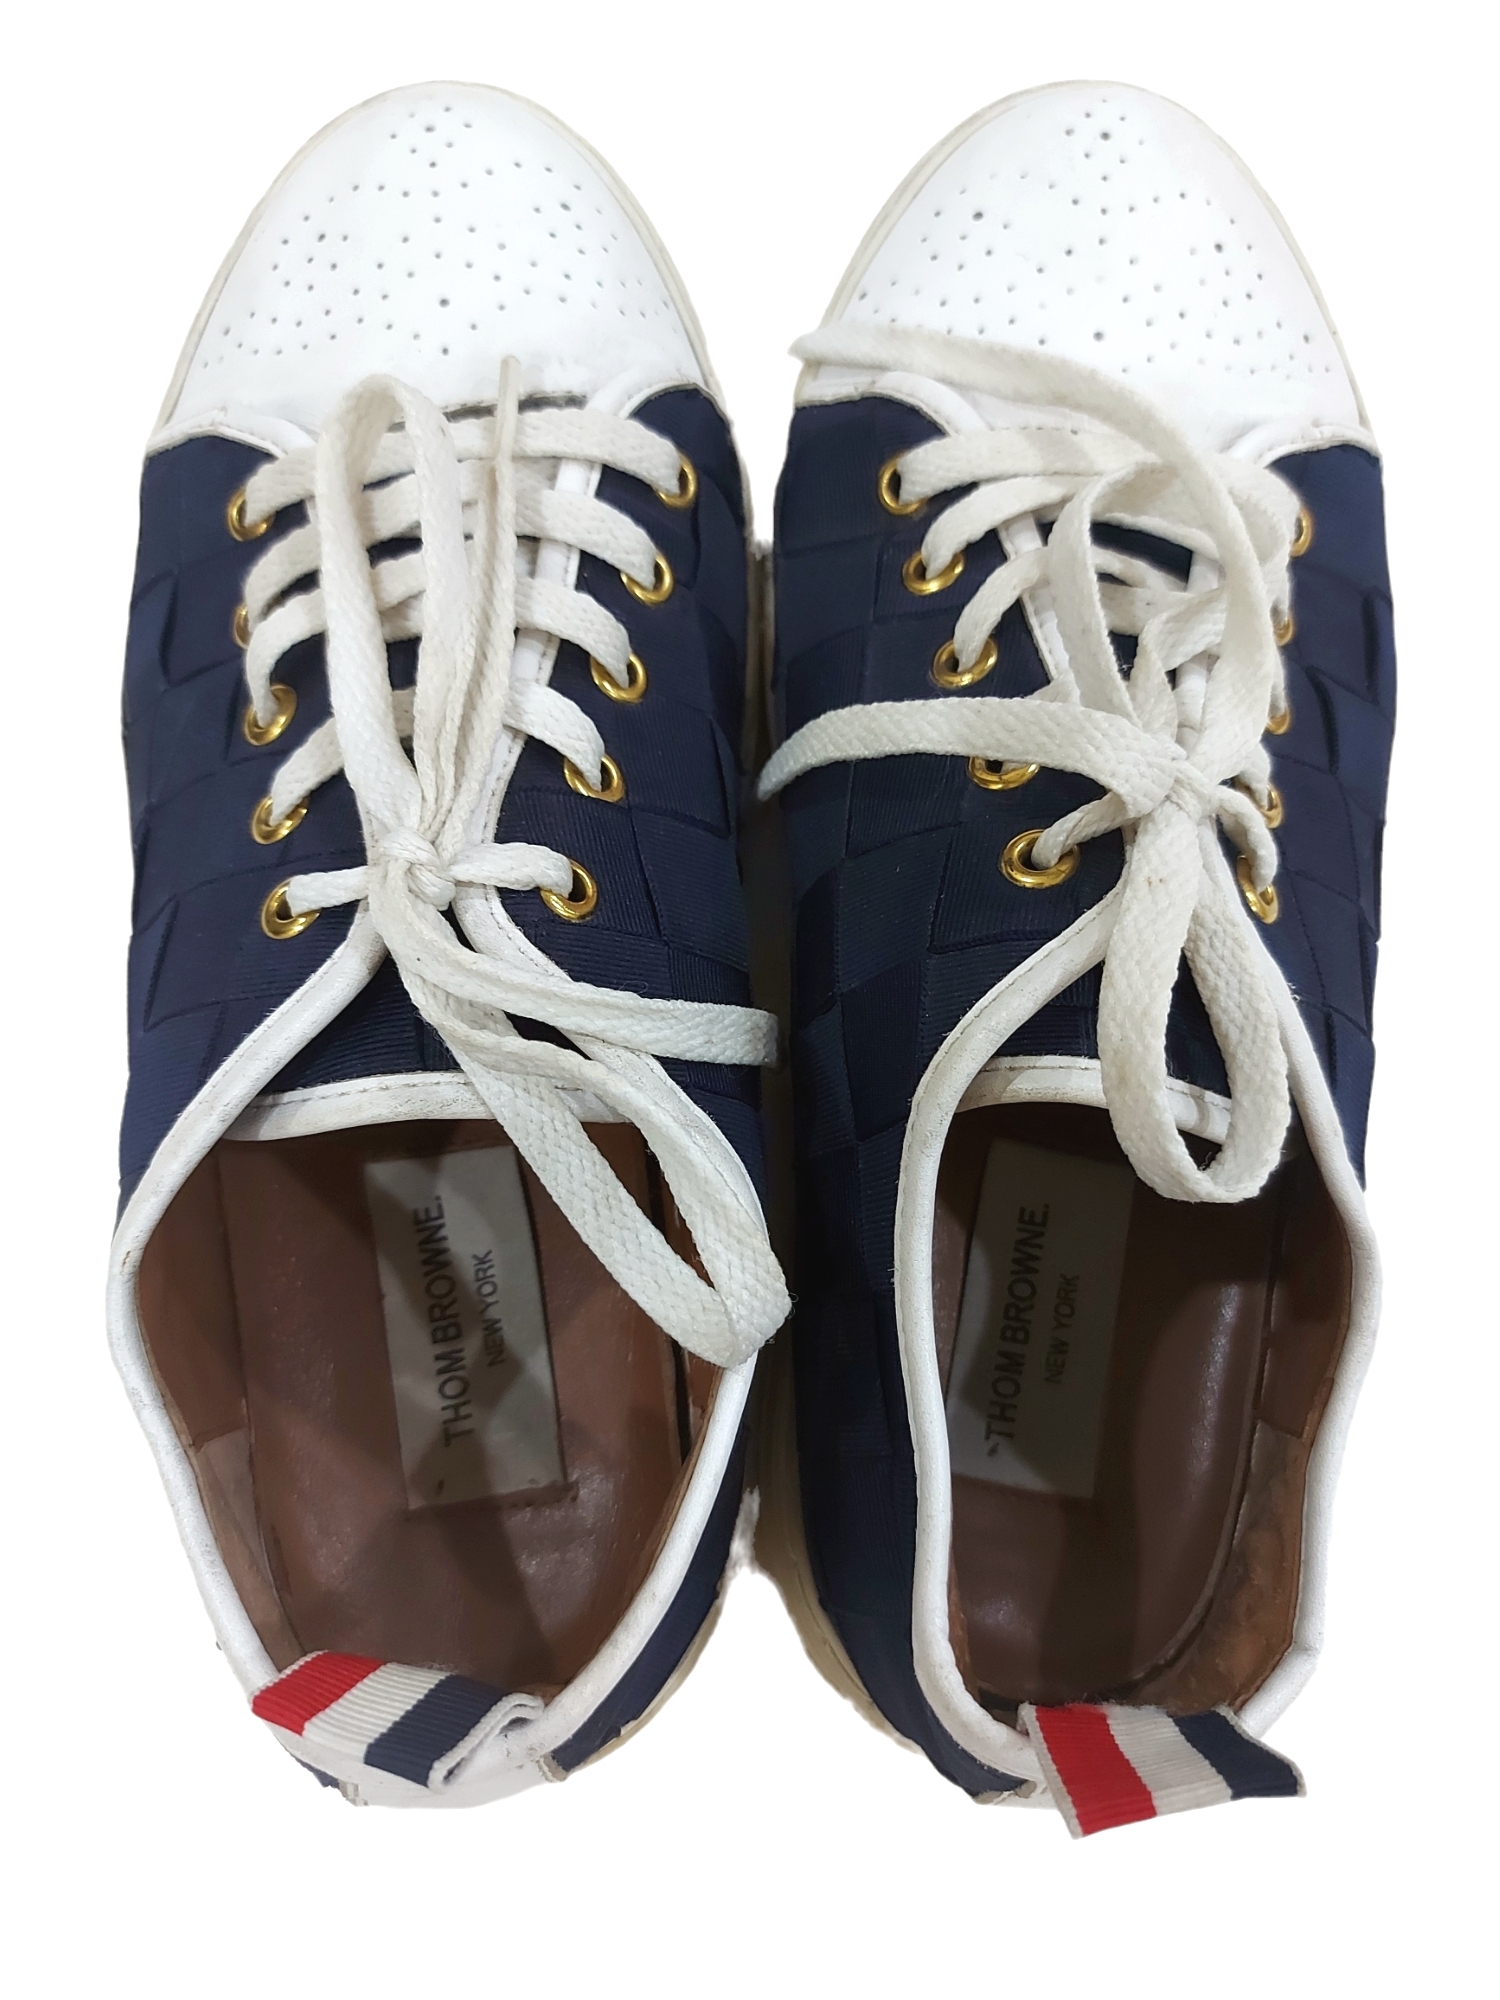 THOM BROWNE WOVEN NAVY SNEAKERS - 5